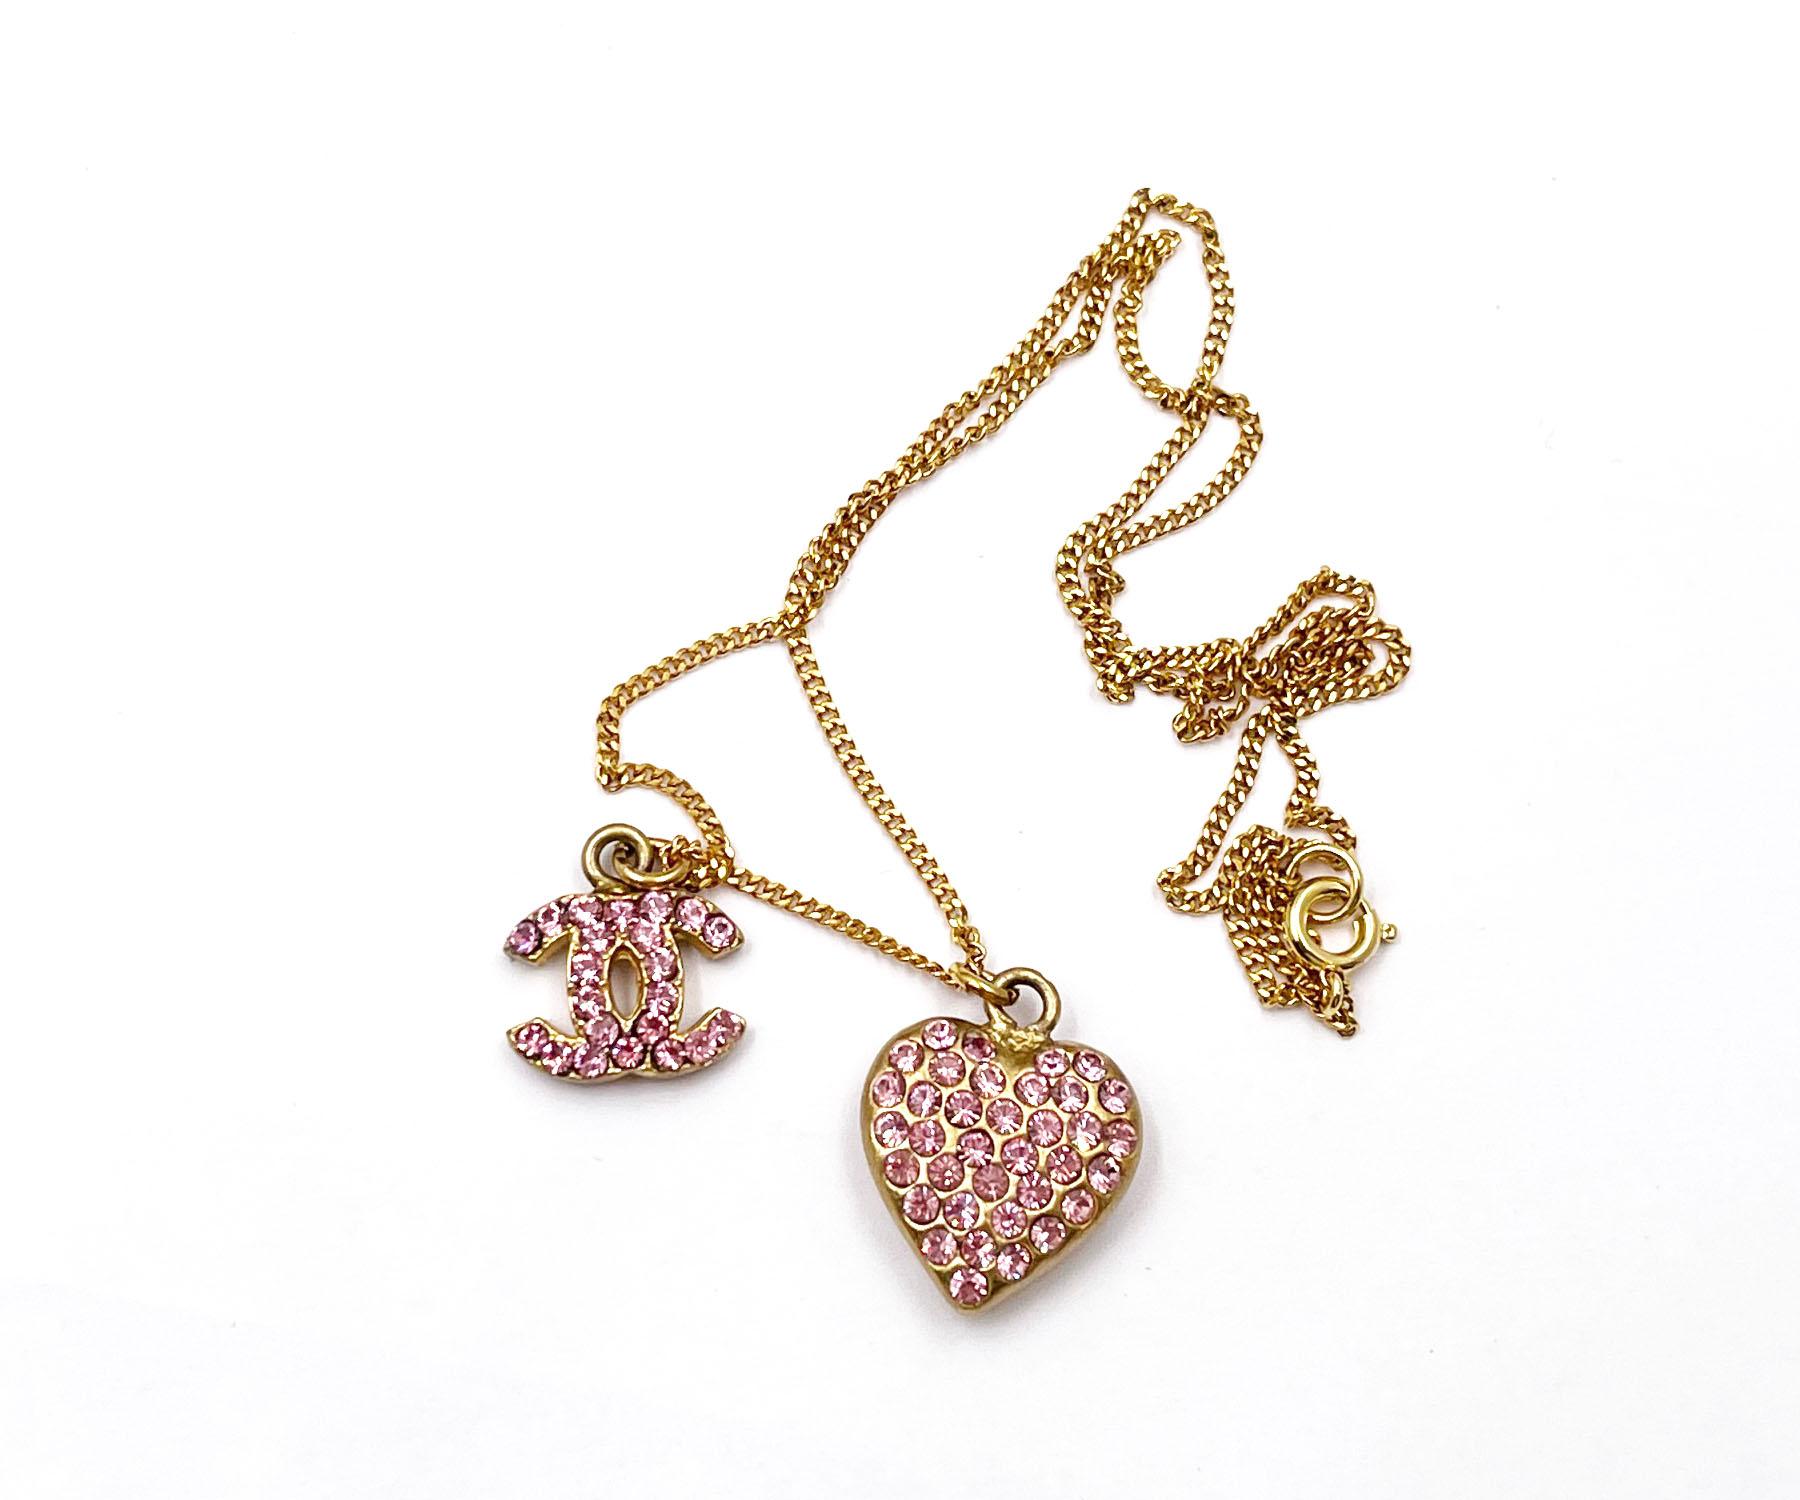 Chanel Vintage Gold Plated CC Heart Pink Crystal Necklace

*Marked 02
*Made in France
*Comes with the original box and tag

-The chain is approximately 16.5